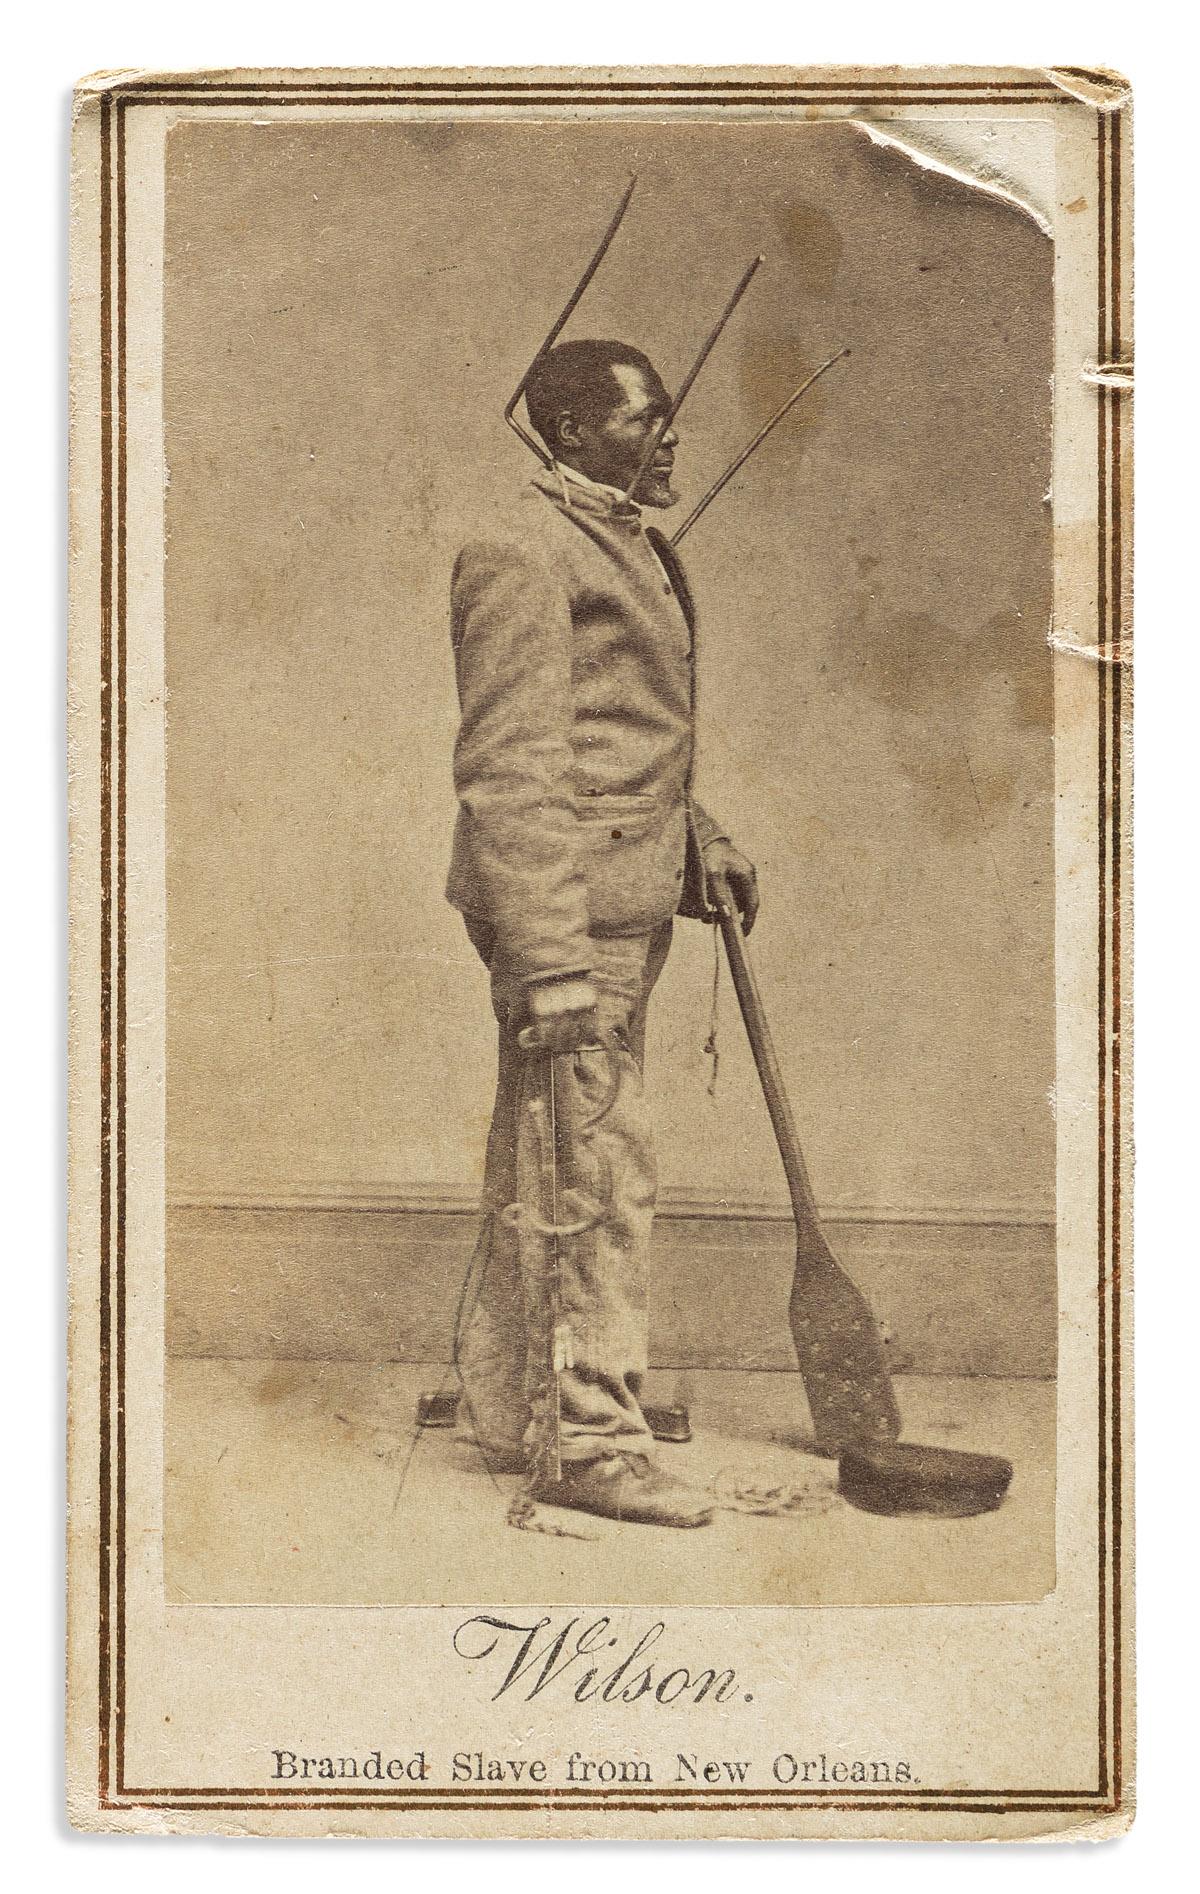 (SLAVERY & ABOLITION.) Charles Paxson, photographer. Wilson, Branded Slave from New Orleans.